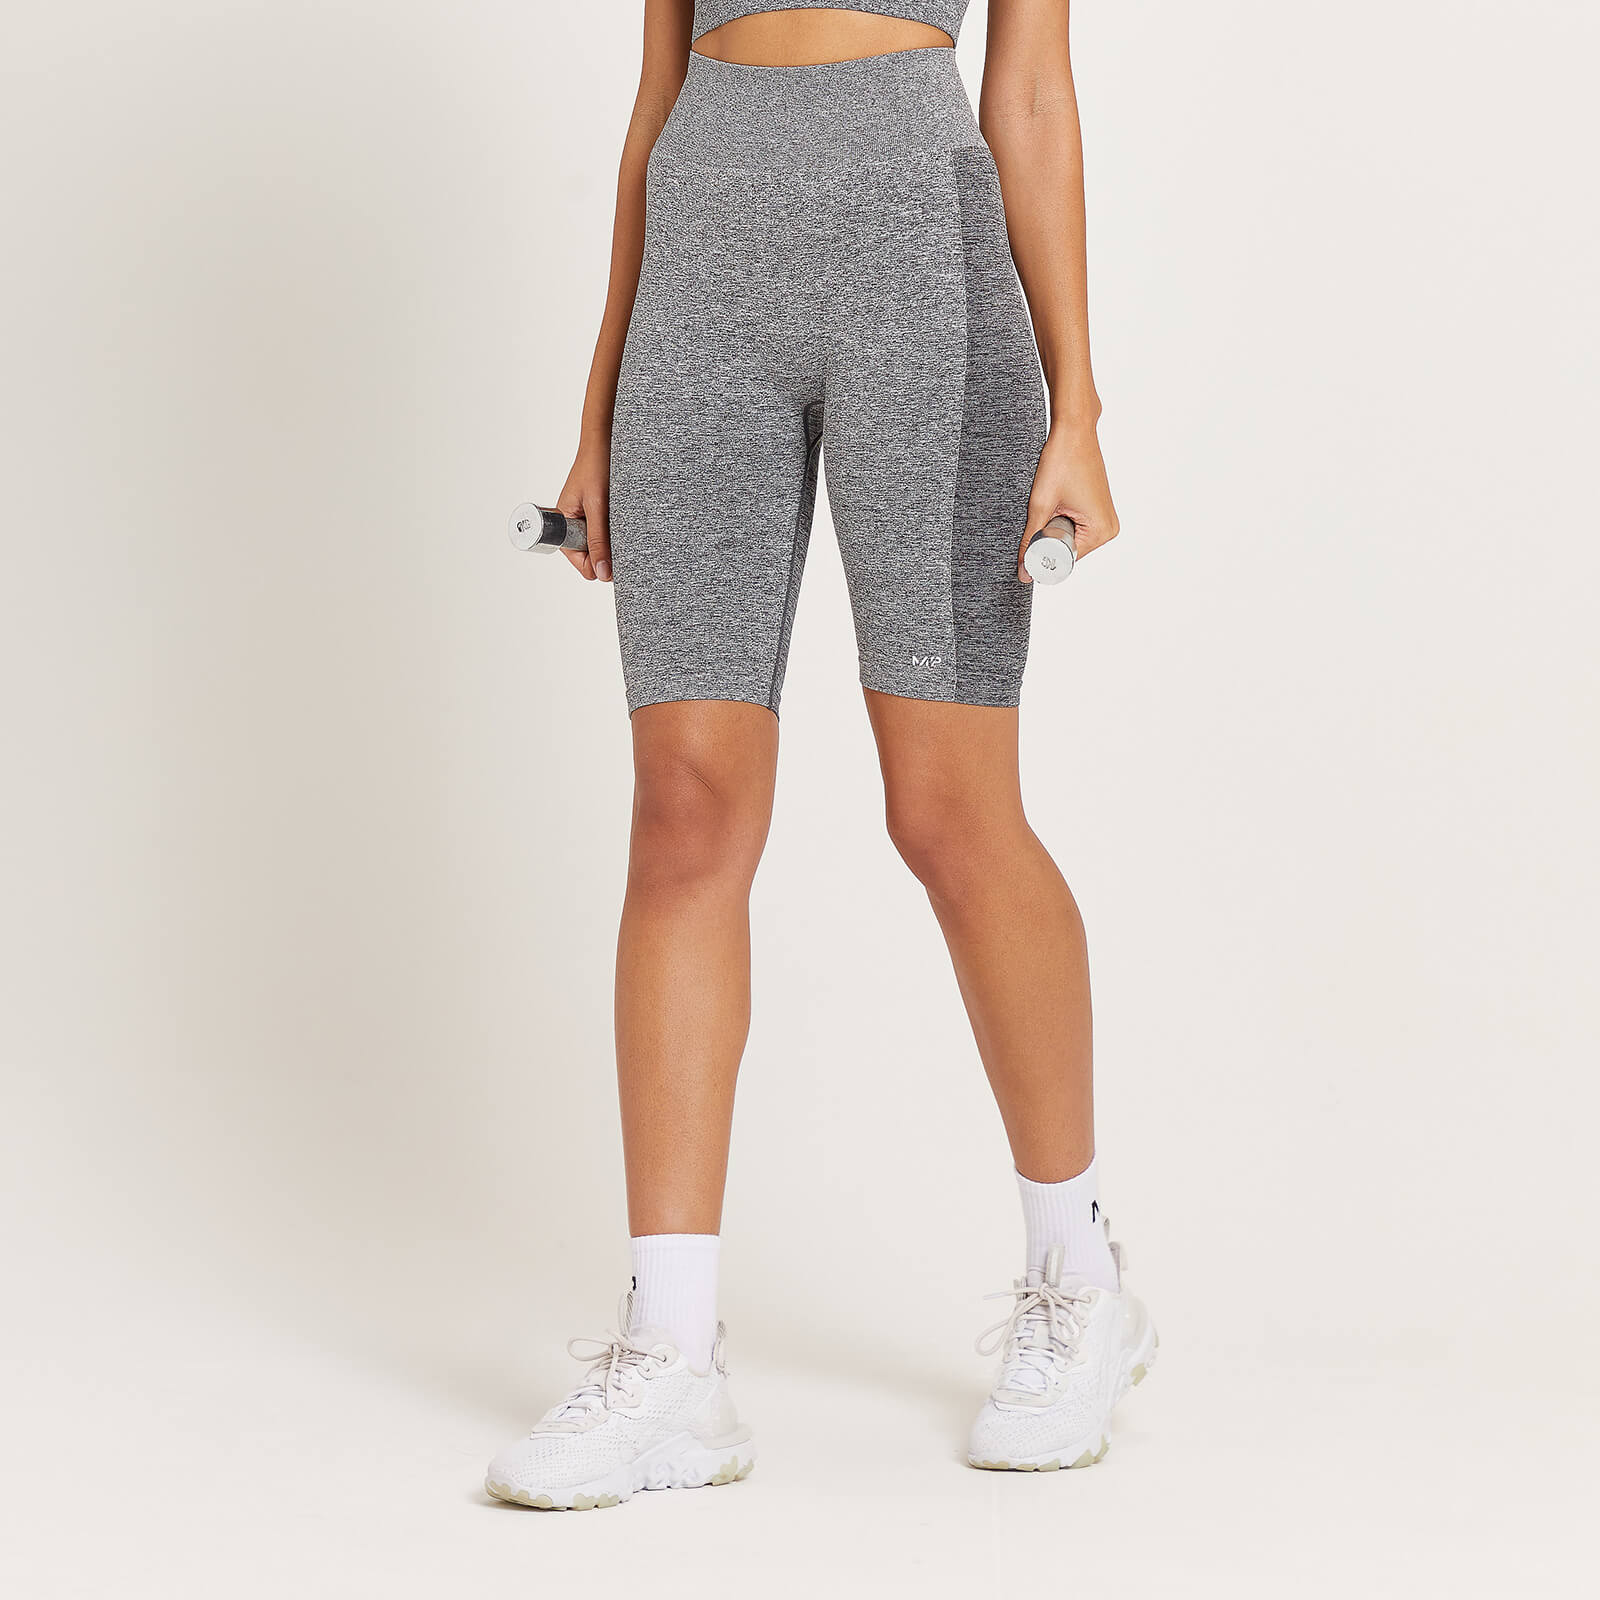 MP Women's Curve High Waisted Cycling Shorts - Grey Marl - XS